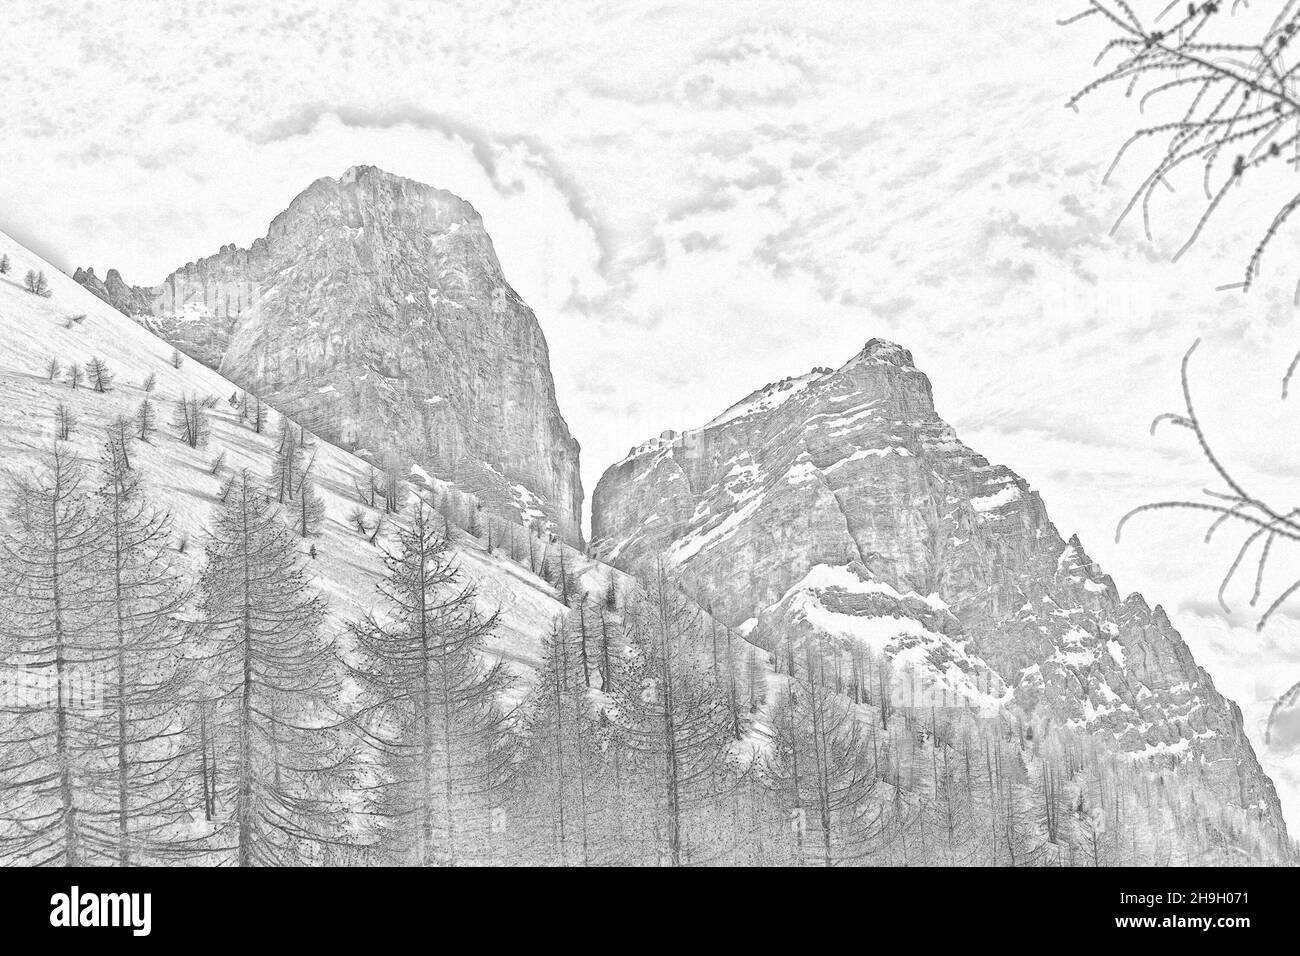 Illustration with charcoal technique of Mount Pelmo in winter conditions Stock Photo